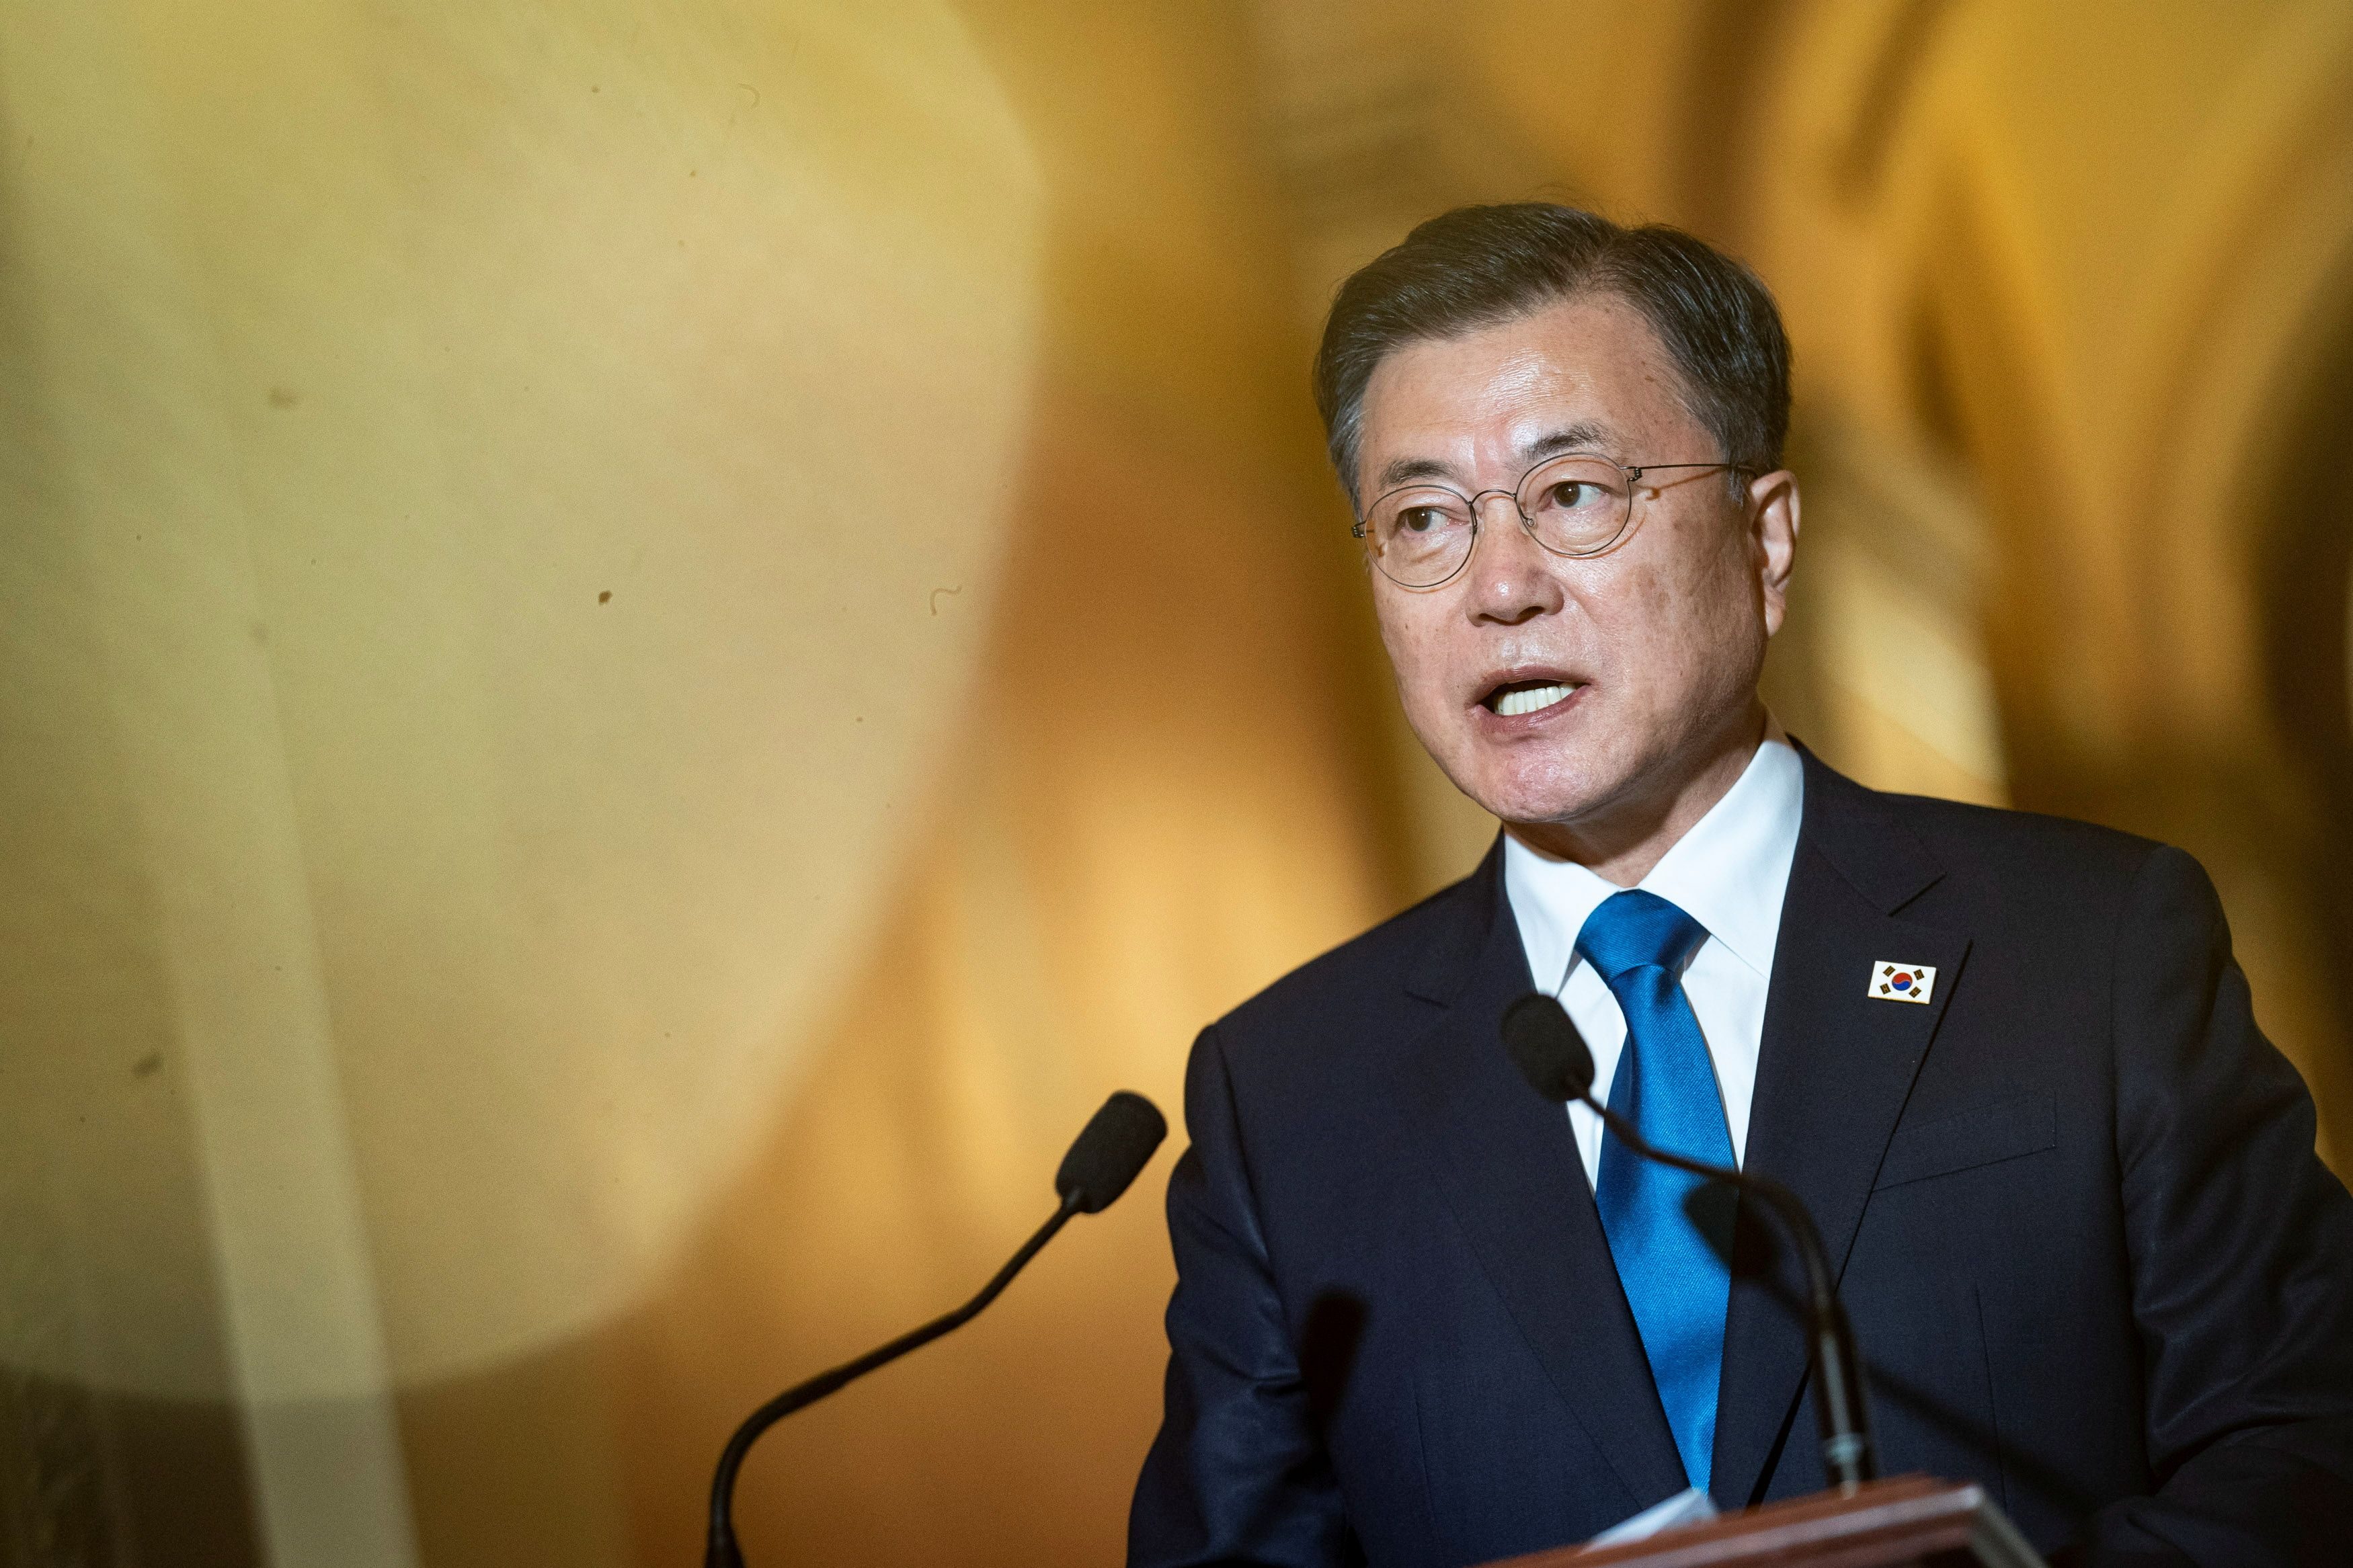 South Korea’s Moon to be 2nd leader welcomed by Biden